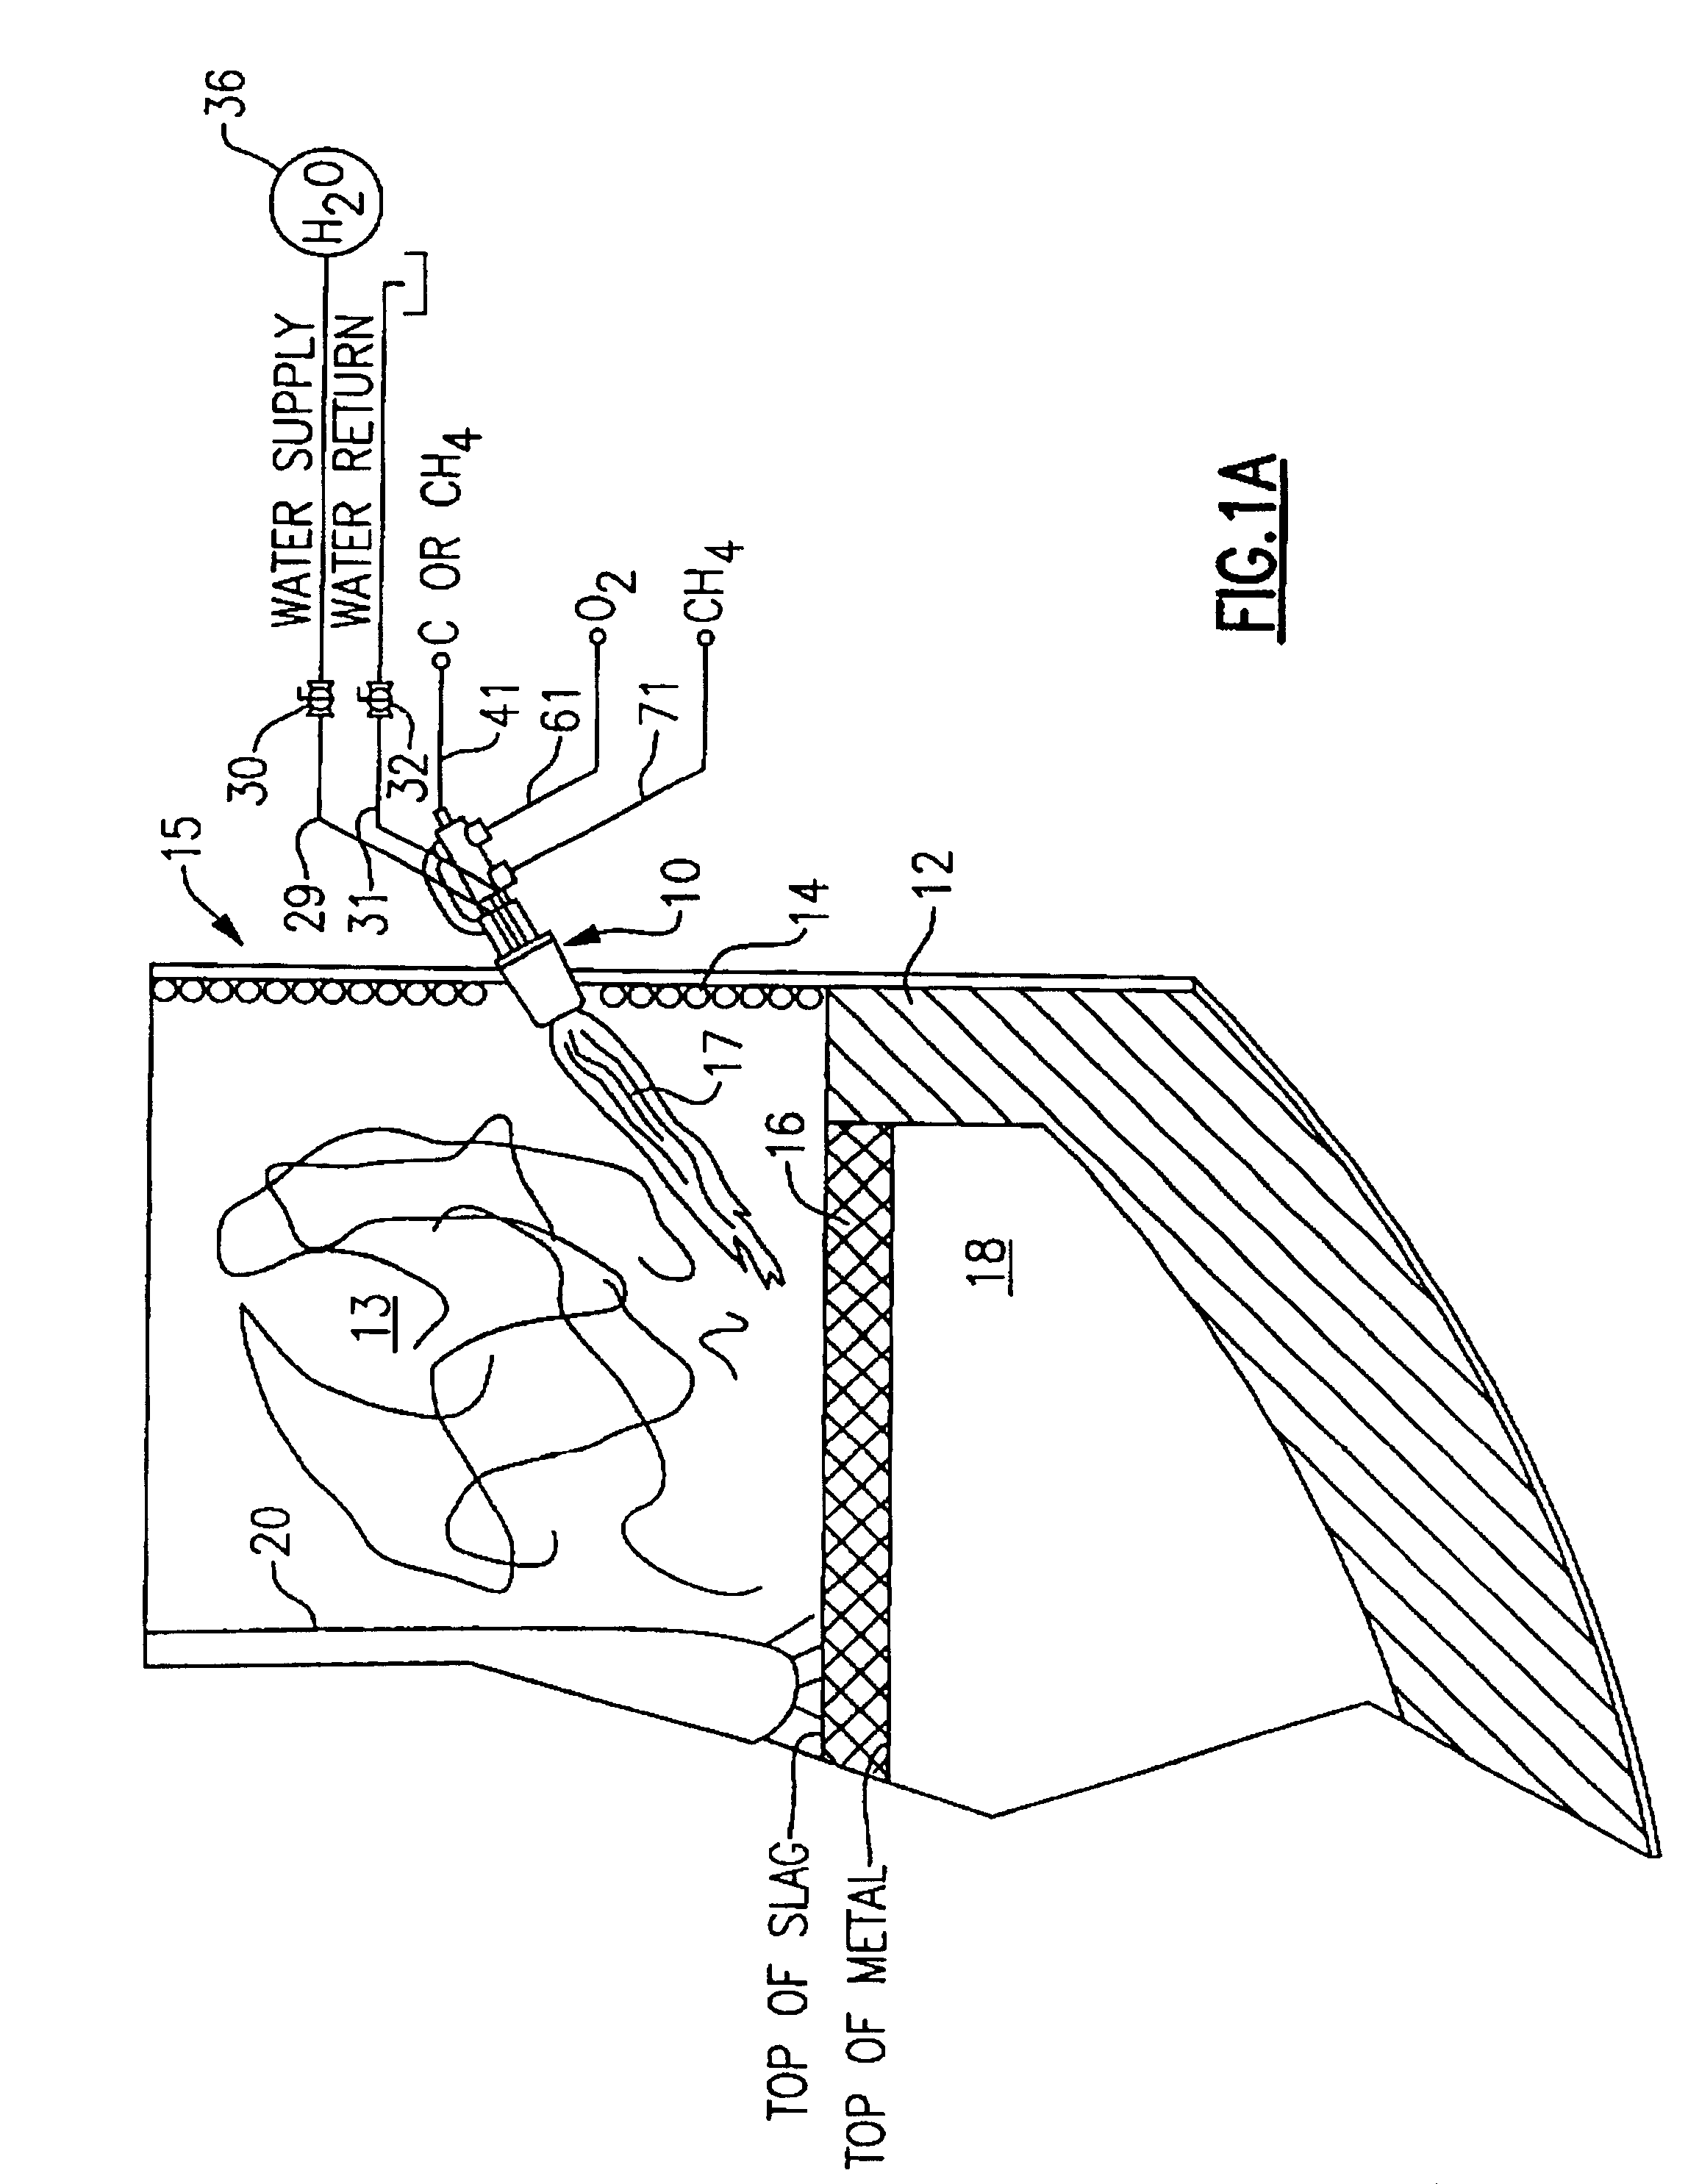 Method and apparatus for improved EAF steelmaking